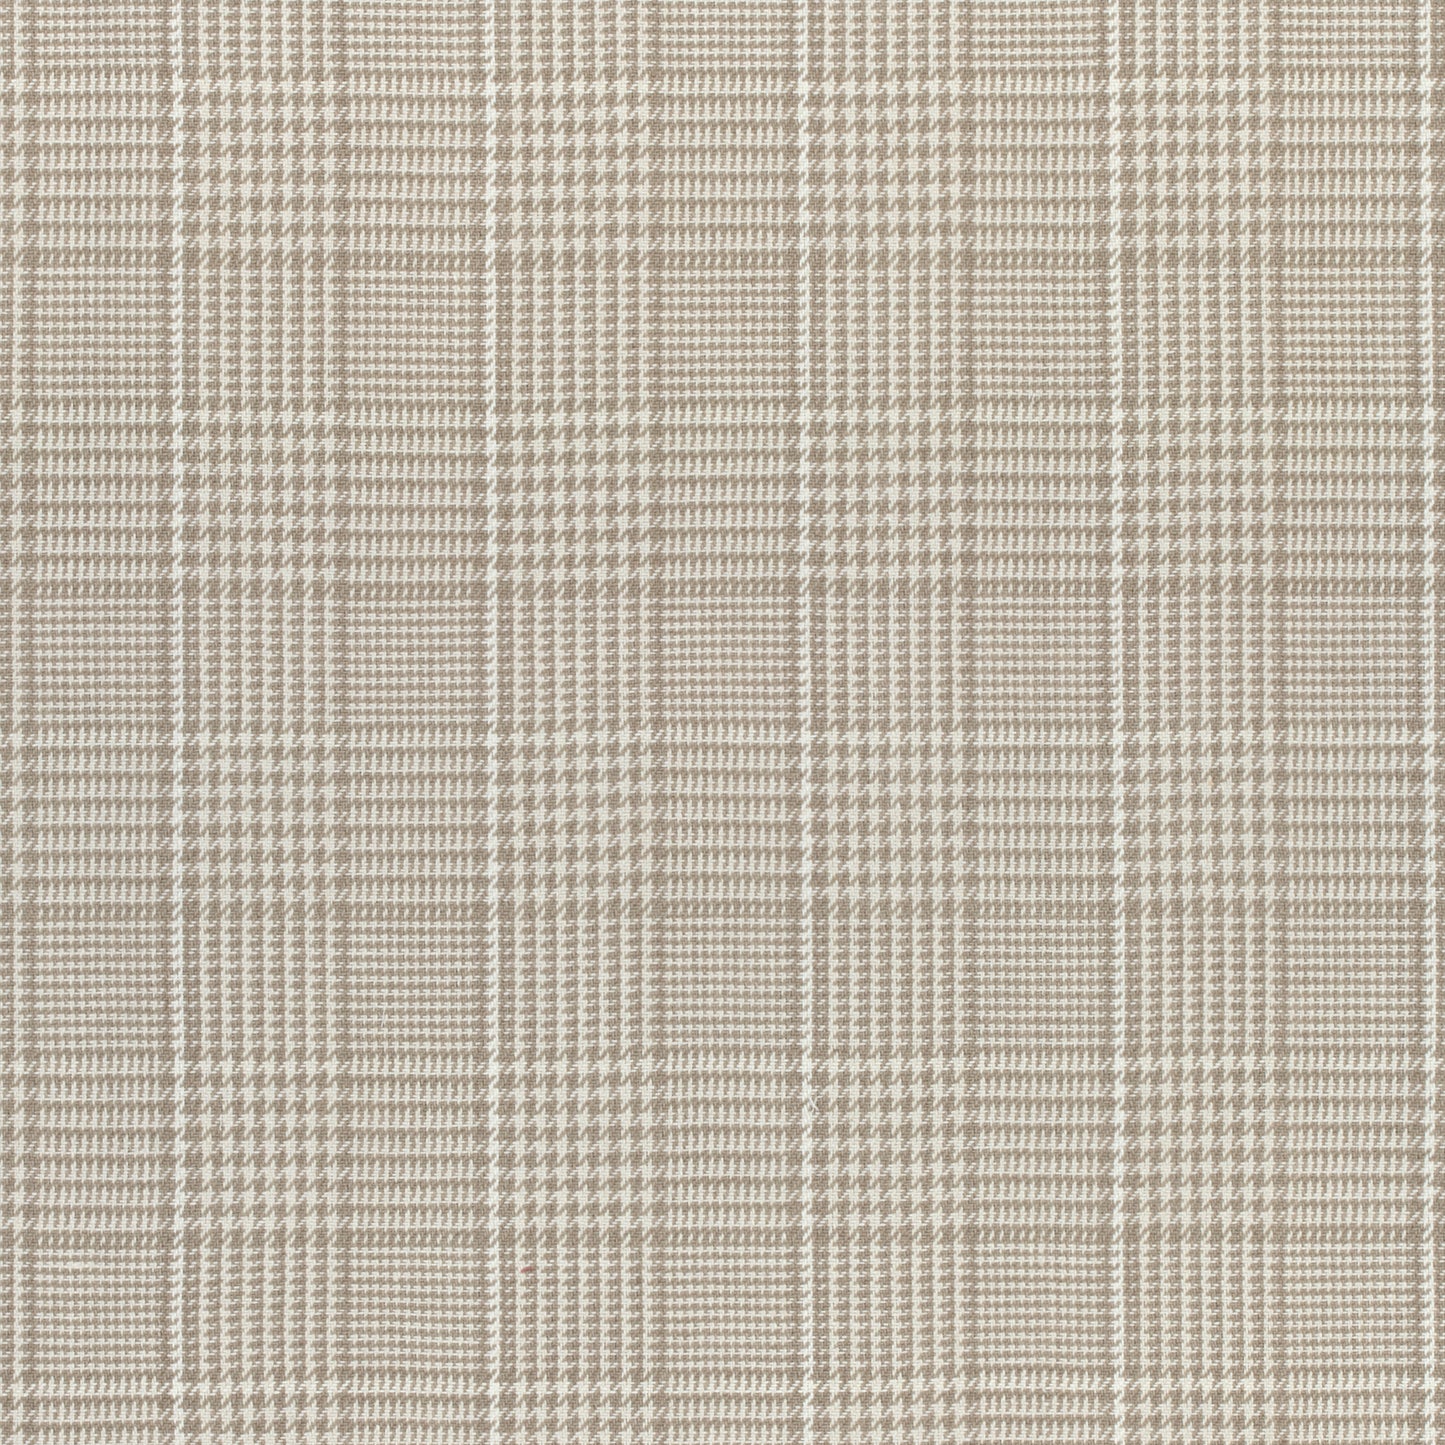 Purchase Thibaut Fabric SKU# W710205 pattern name Grassmarket Check color Beige